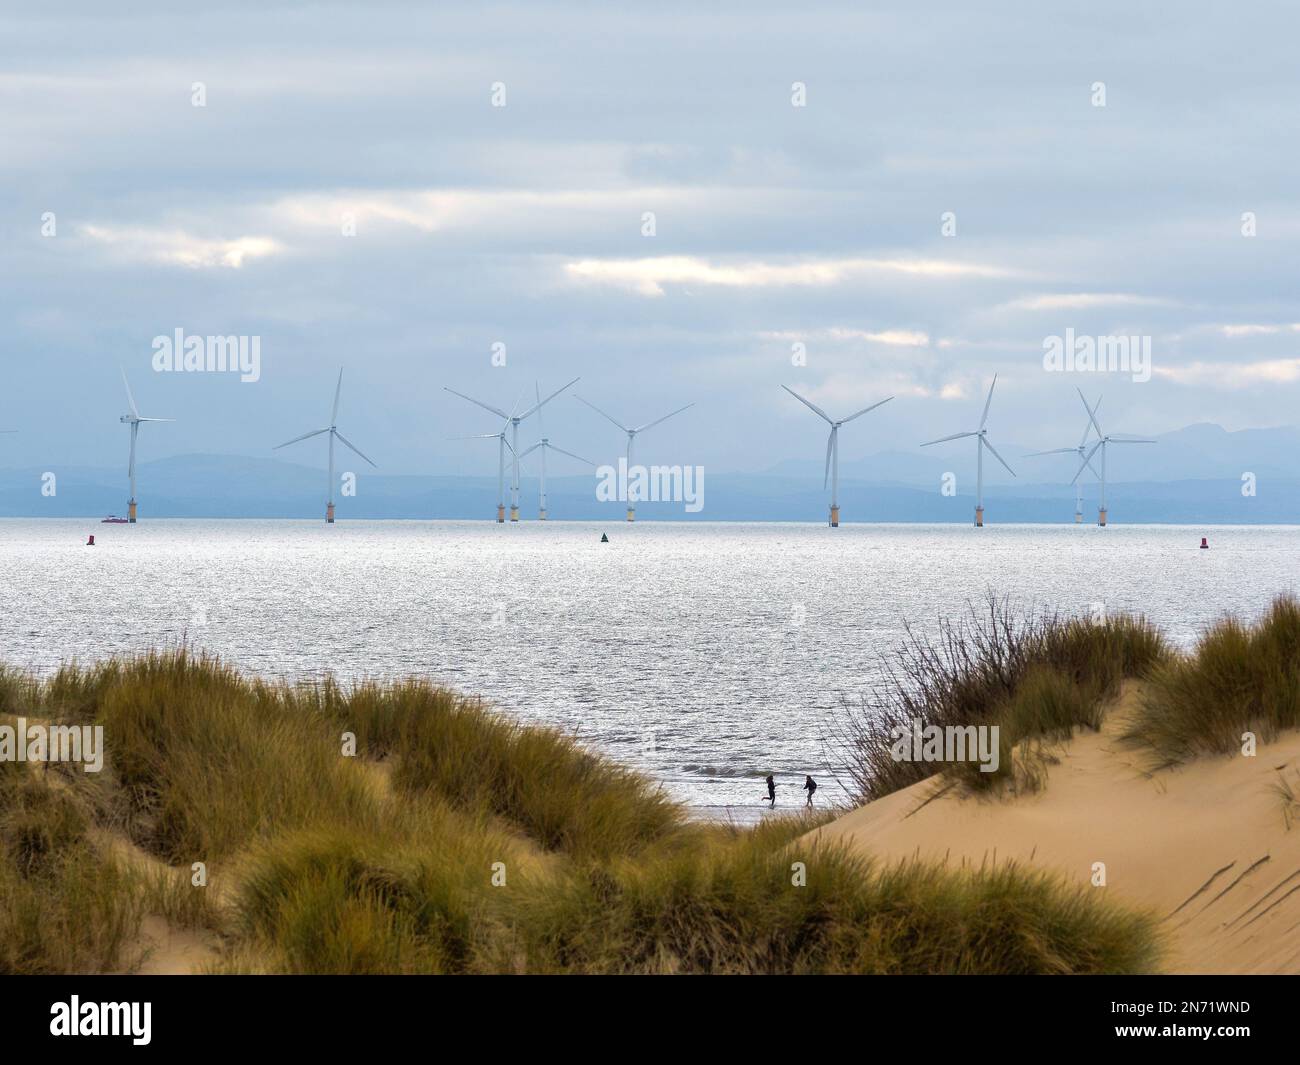 Off shore wind turbines in the sea off Formby Point Sefton Coast Merseyside with sand dunes in the foreground Stock Photo